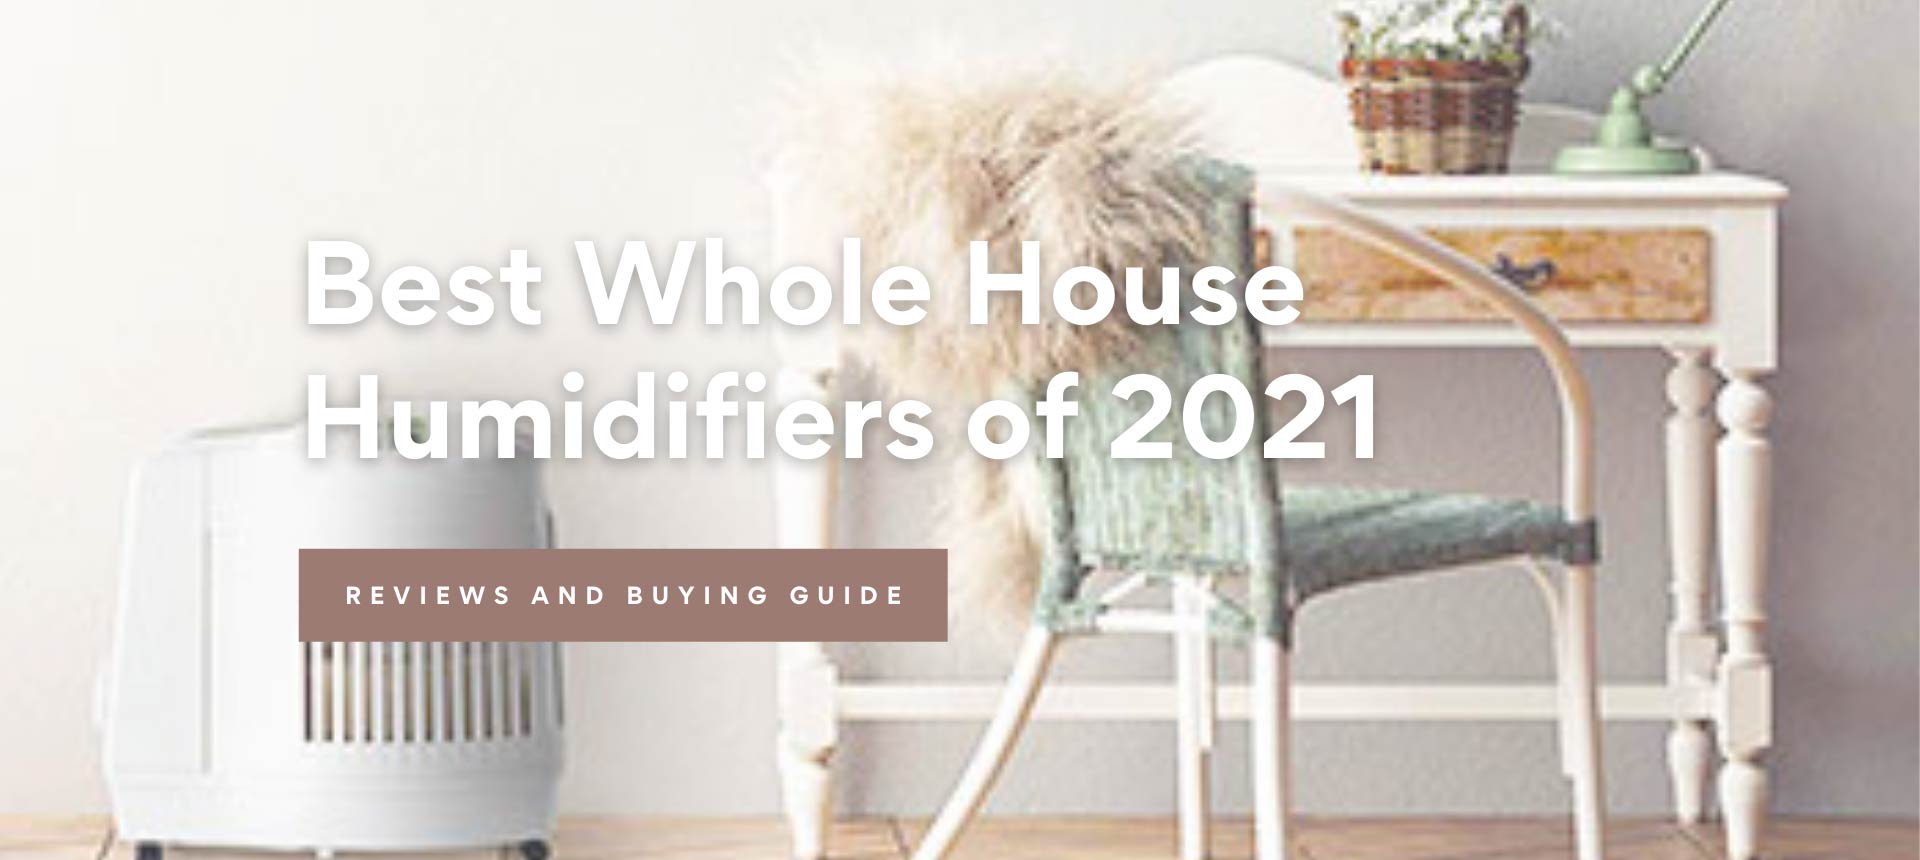 Best Whole House Humidifiers of 2021